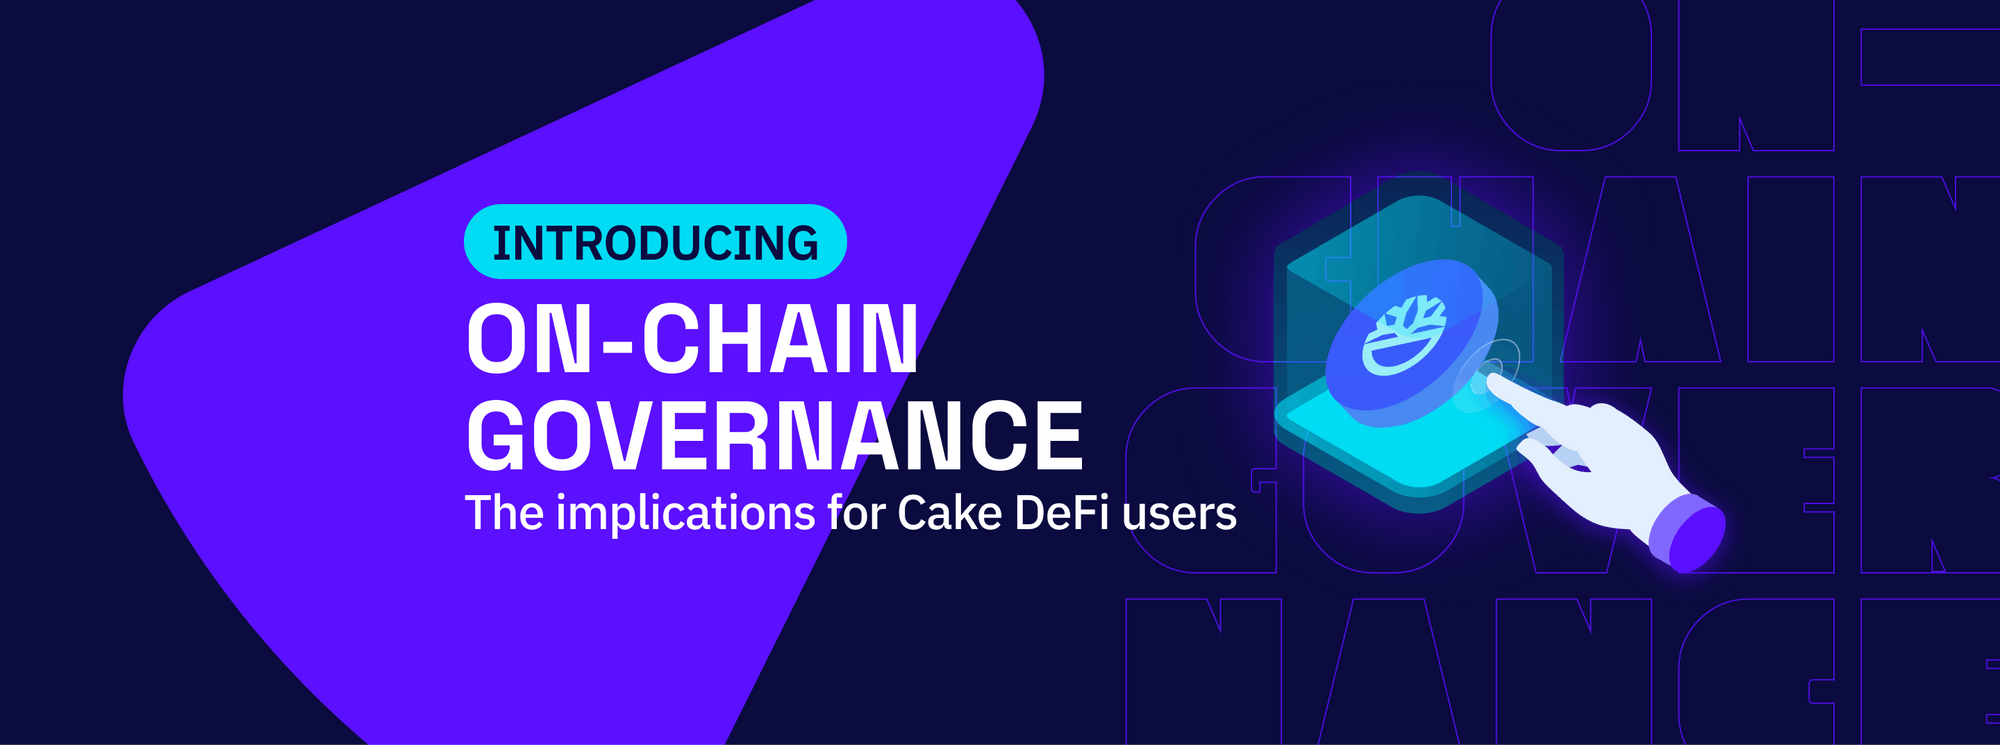 Introducing On-chain Governance: The Implications for Cake DeFi Users